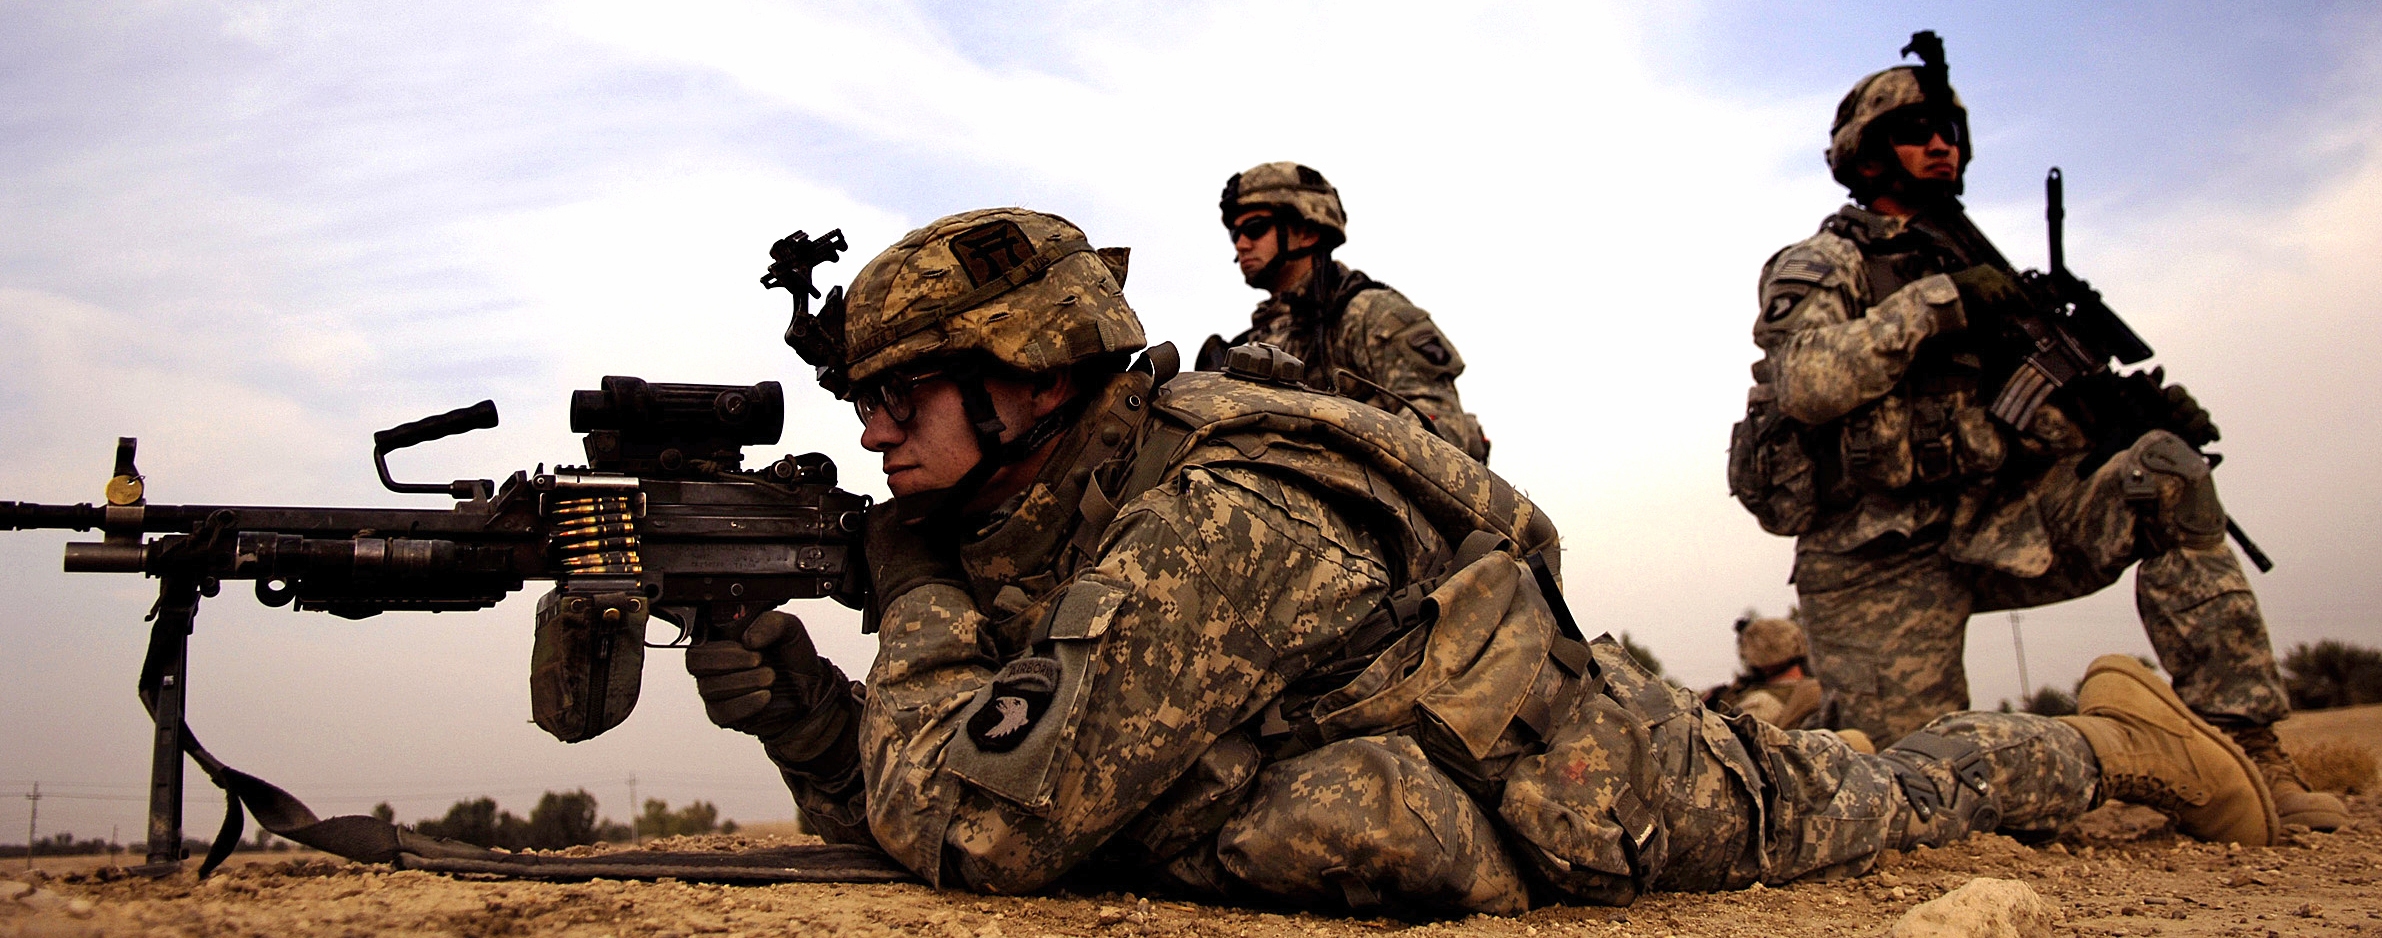 Army Combat Pictures It is hoped that this site will offer helpful and timely resources for military members, especially Soldiers, who are looking to be better equipped to make ...